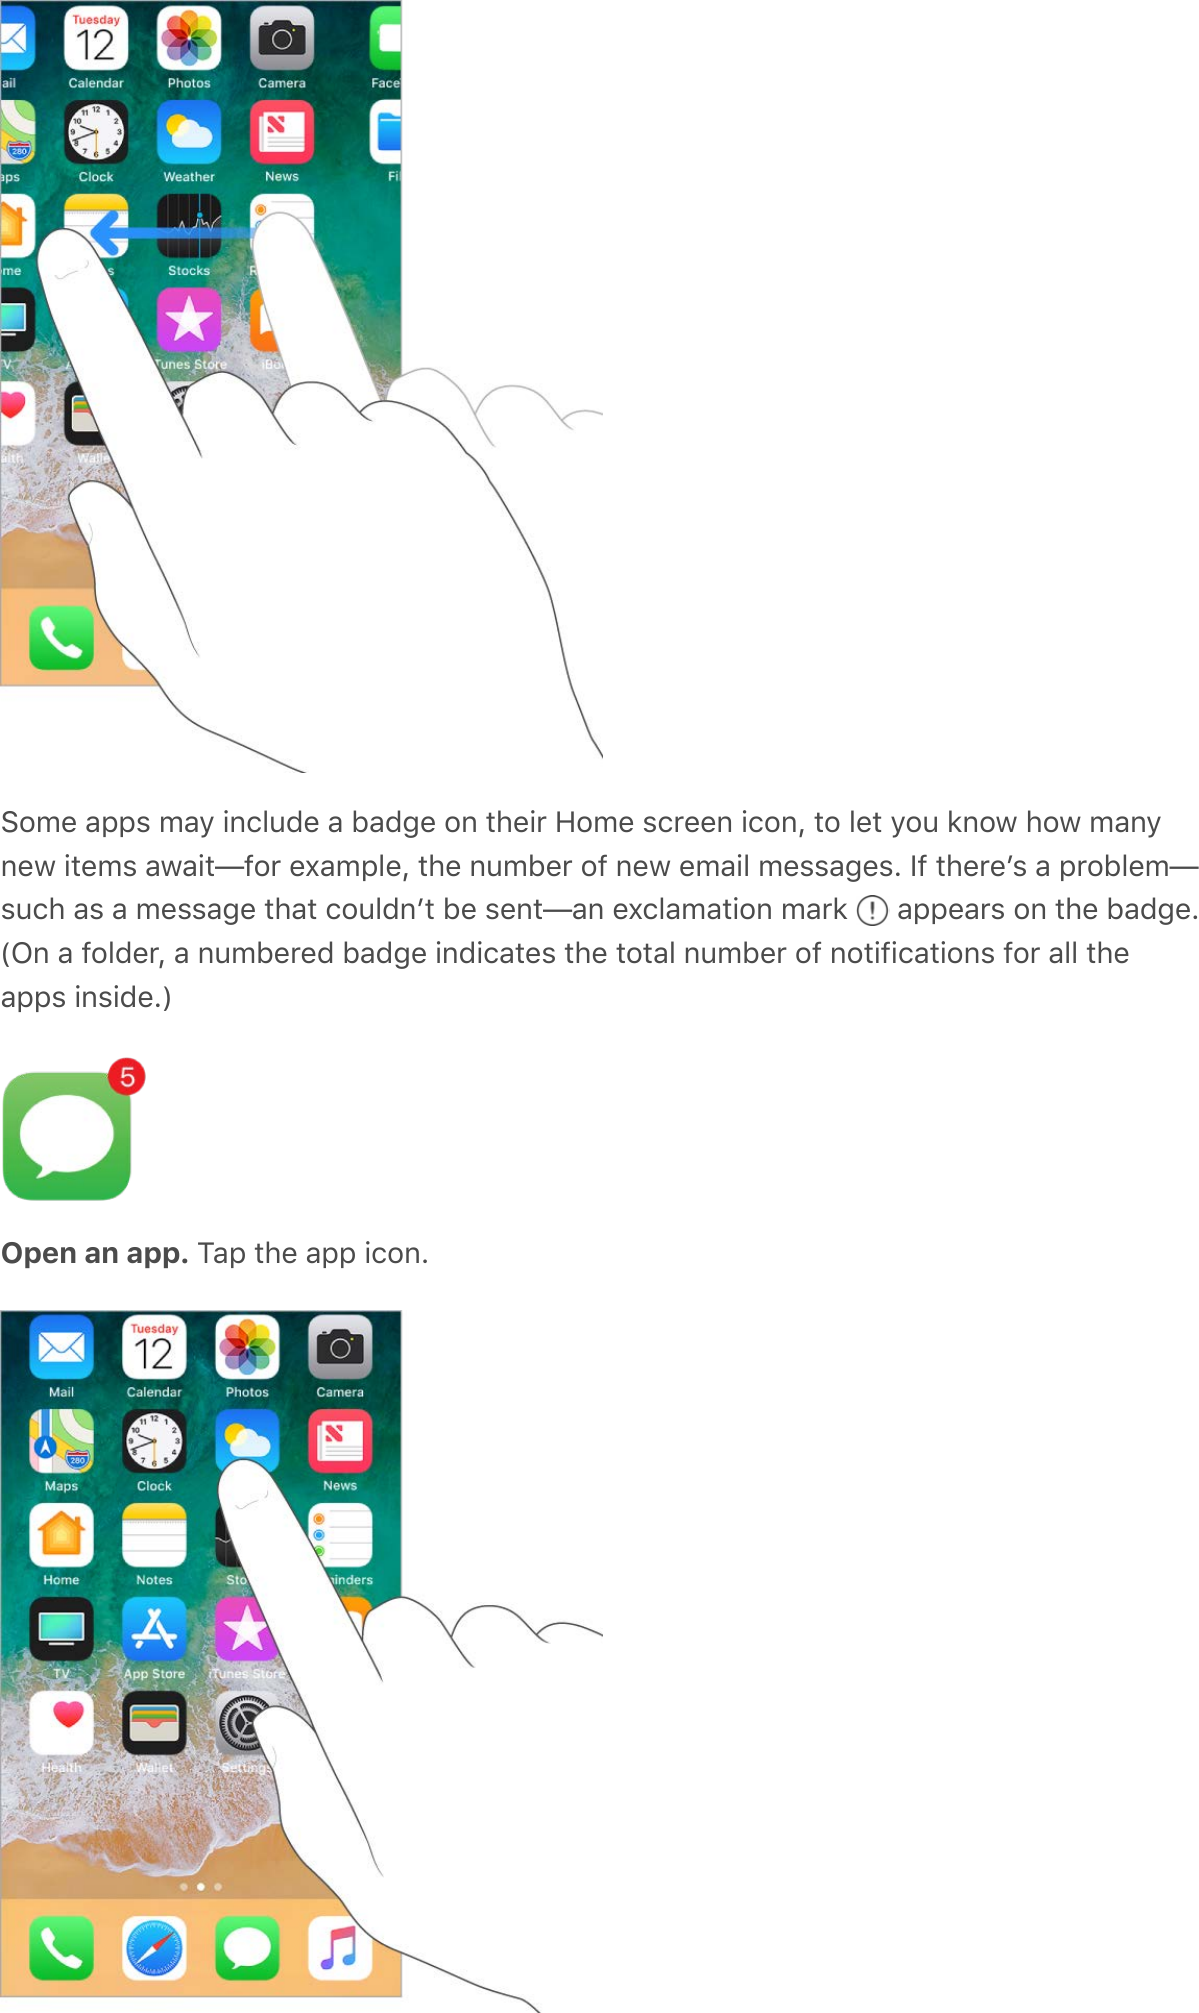 Some apps may include a badge on their Home screen icon, to let you know how manynew items await—for example, the number of new email messages. If thereʼs a problem—such as a message that couldnʼt be sent—an exclamation mark   appears on the badge.(On a folder, a numbered badge indicates the total number of notifications for all theapps inside.)Open an app. Tap the app icon.